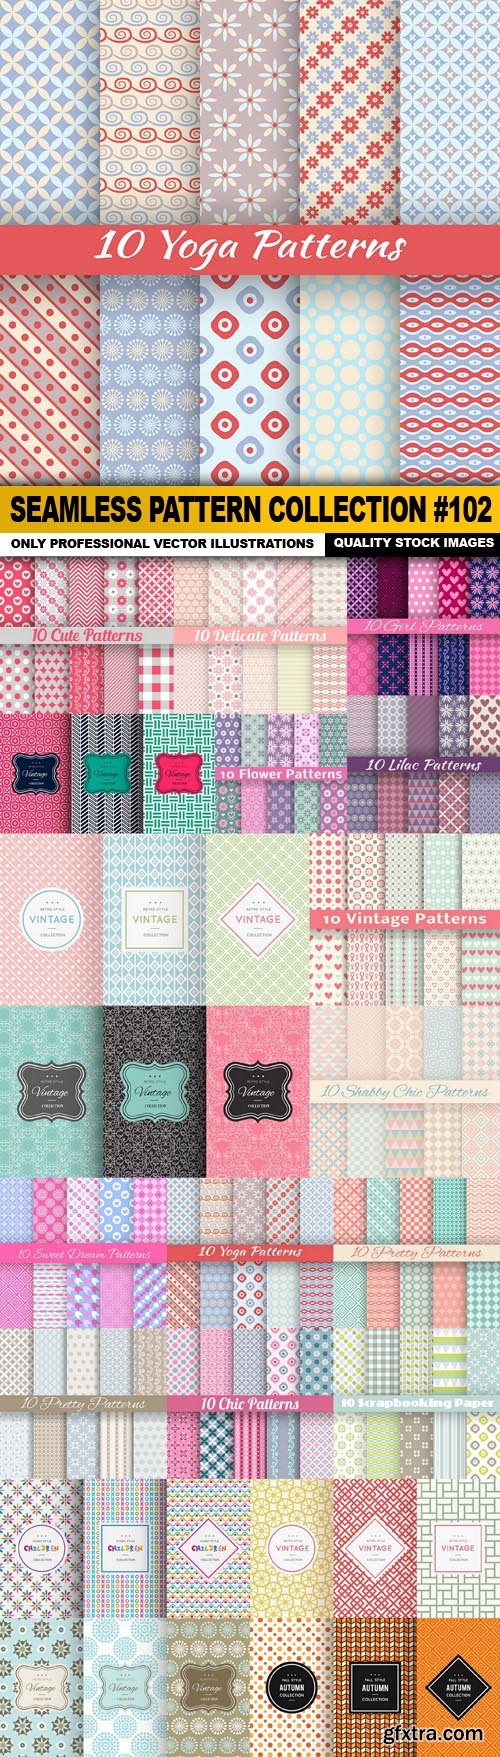 Seamless Pattern Collection #102 - 20 Vector